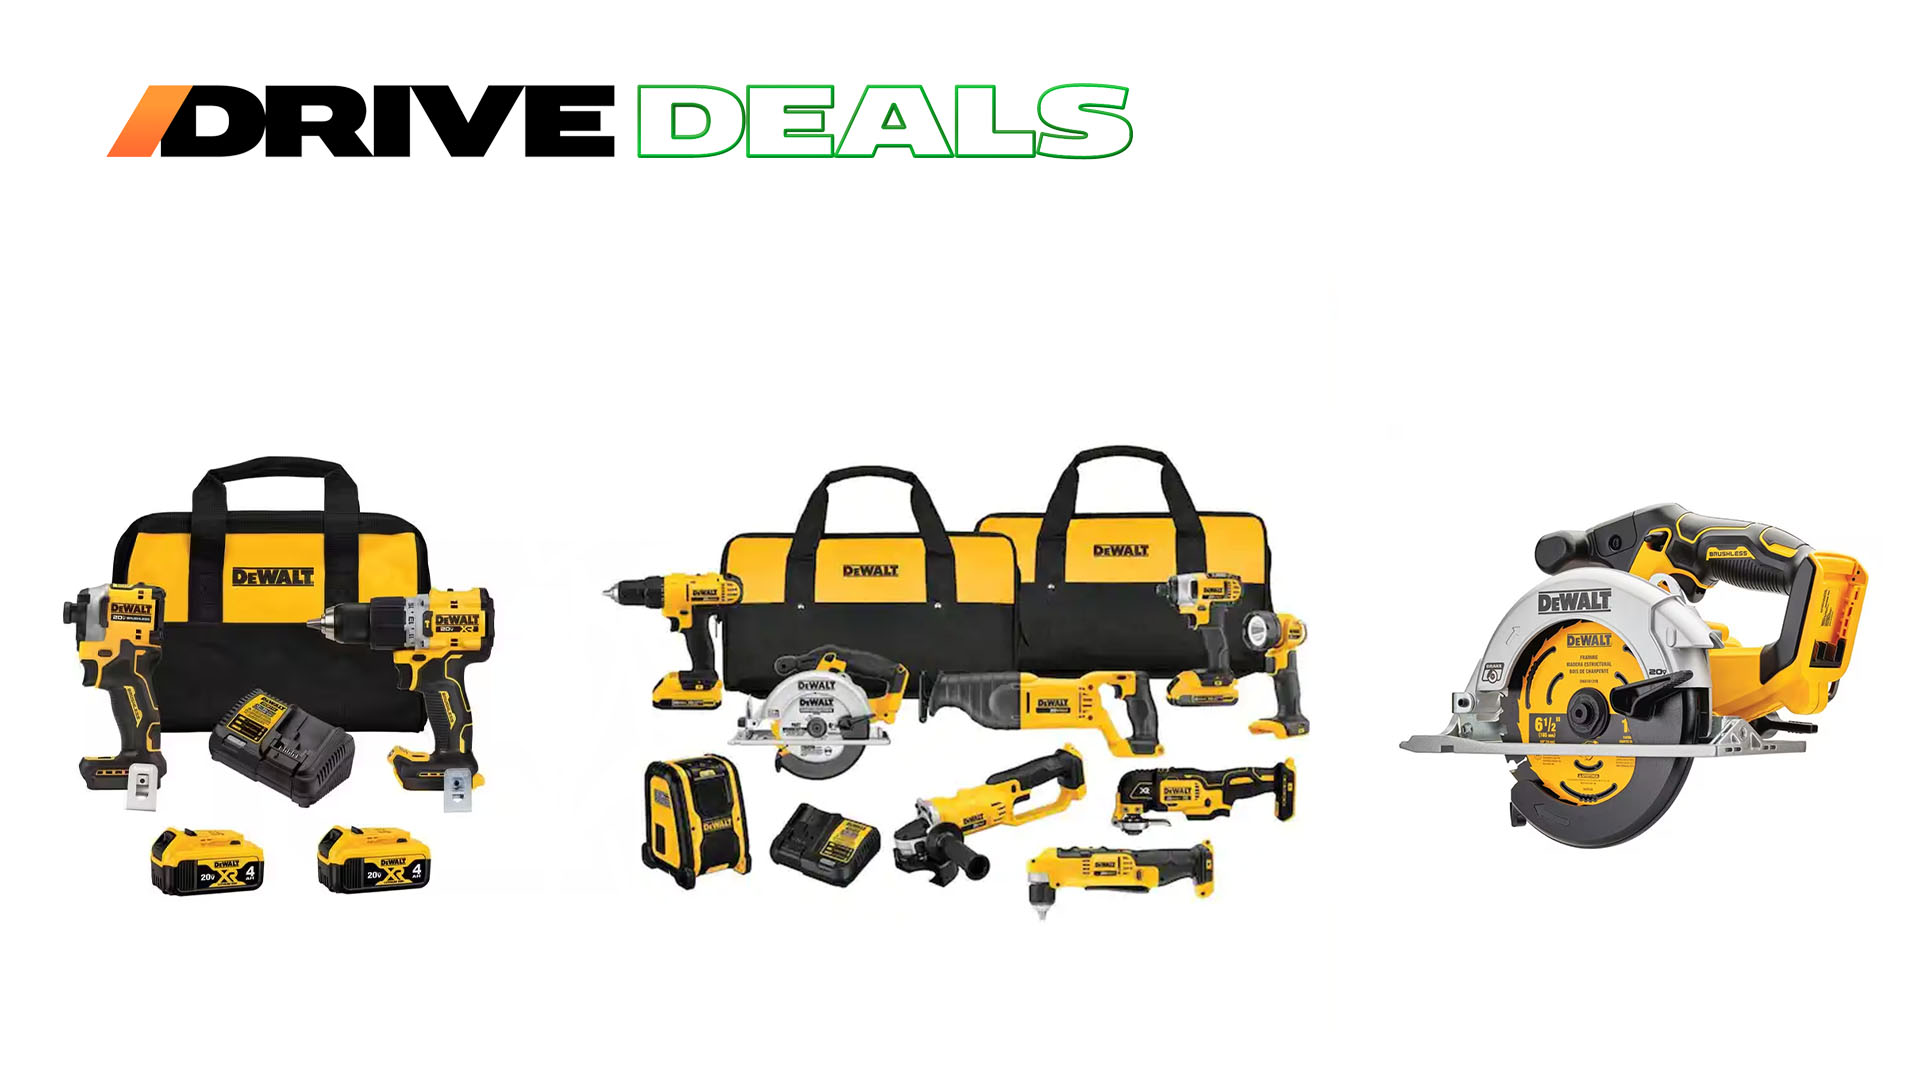 Save Hundred With Home Depot's DeWalt Holiday Sale The Drive